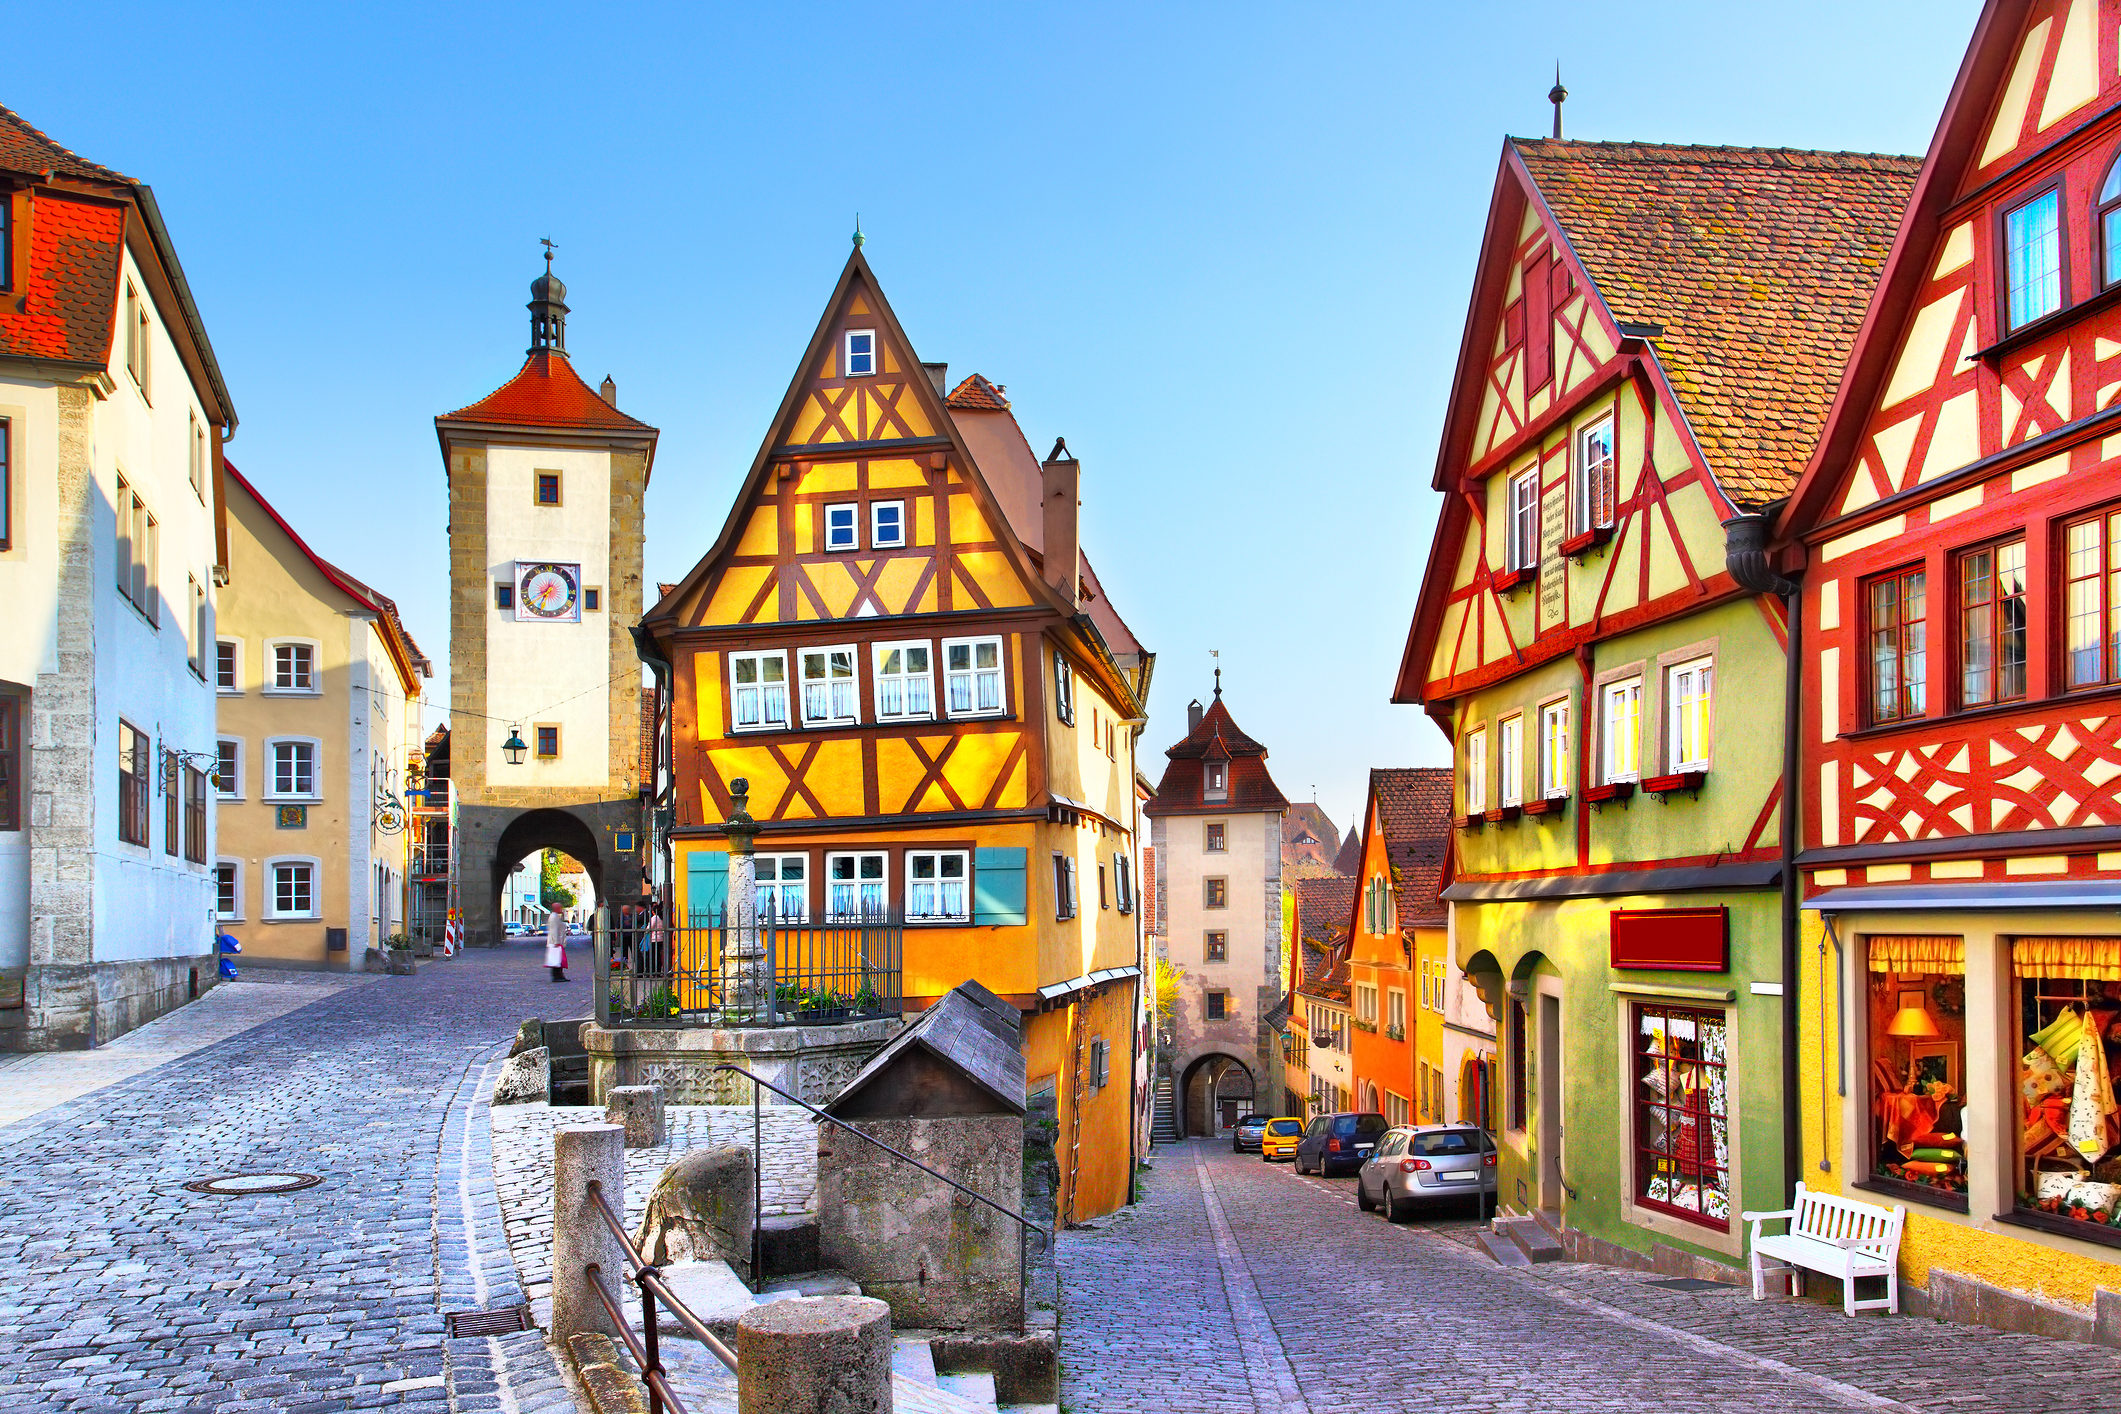 The most famous street in Rothenburg ob der Tauber, Bavaria, Germany